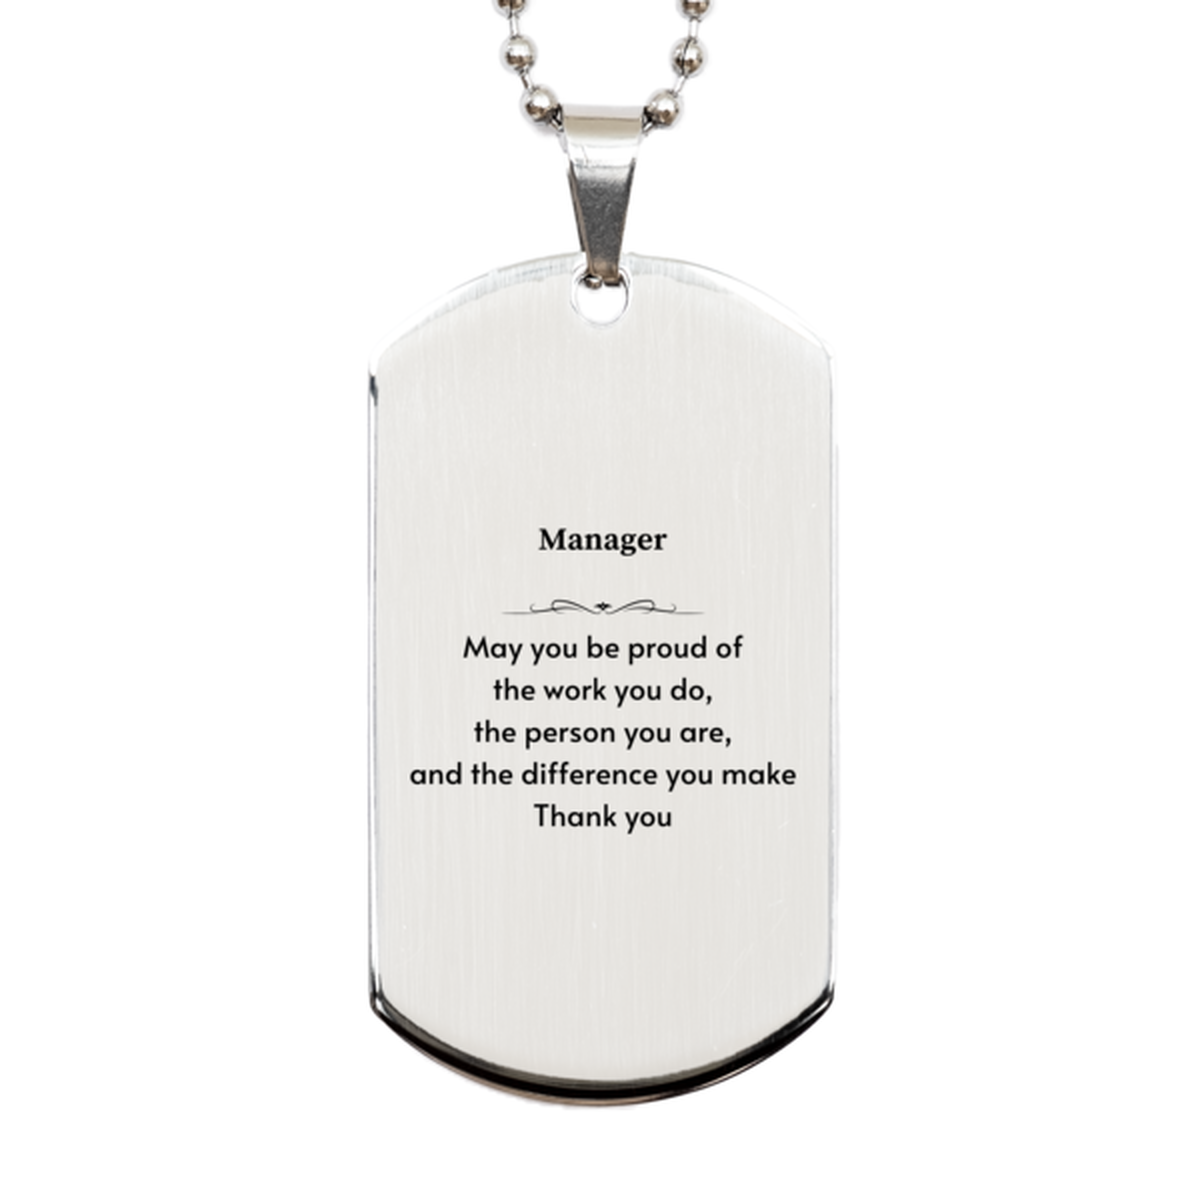 Heartwarming Silver Dog Tag Retirement Coworkers Gifts for Manager, Manager May You be proud of the work you do, the person you are Gifts for Boss Men Women Friends